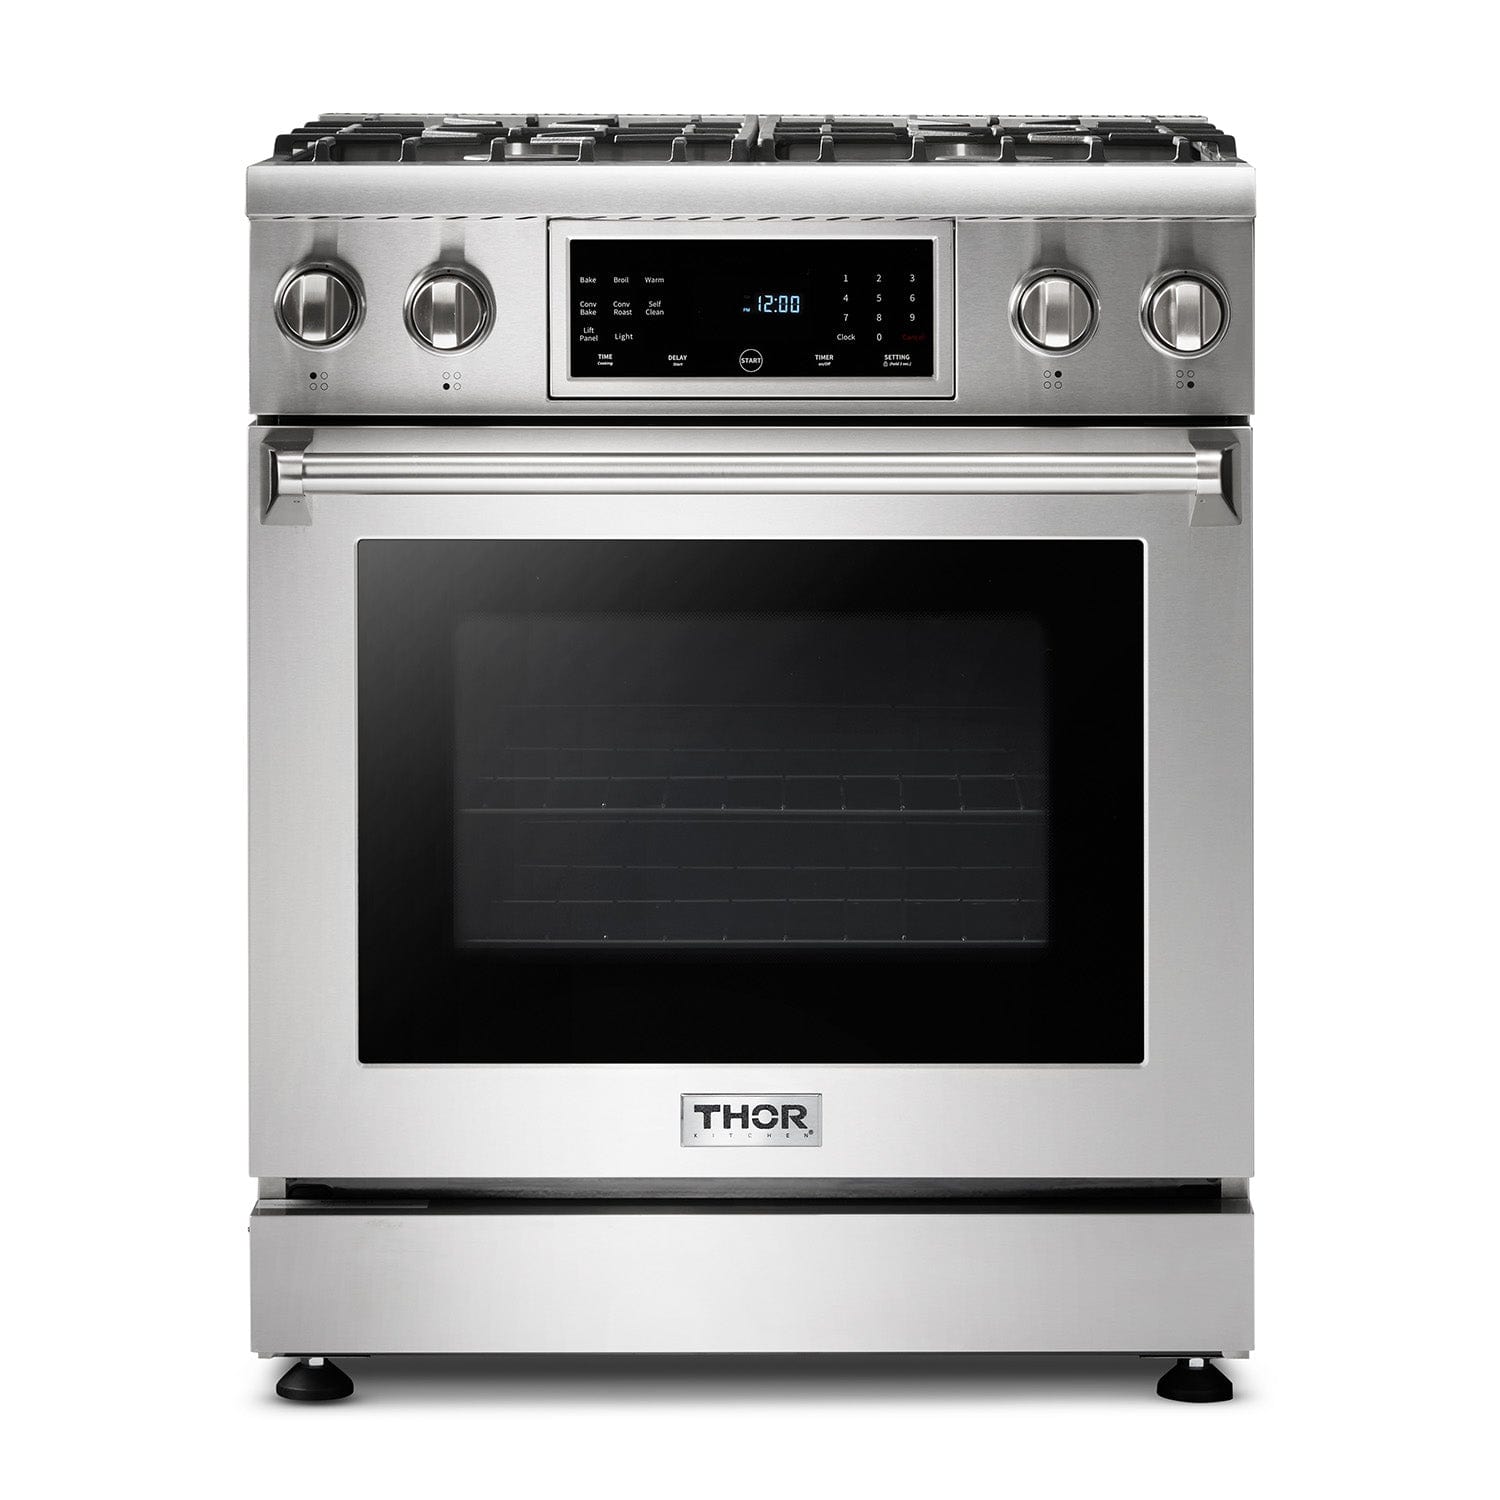 Thor Kitchen 30 In. 4.6 cu. ft. Self-Clean Propane Gas Range in Stainless Steel TRG3001LP Ranges TRG3001LP Luxury Appliances Direct